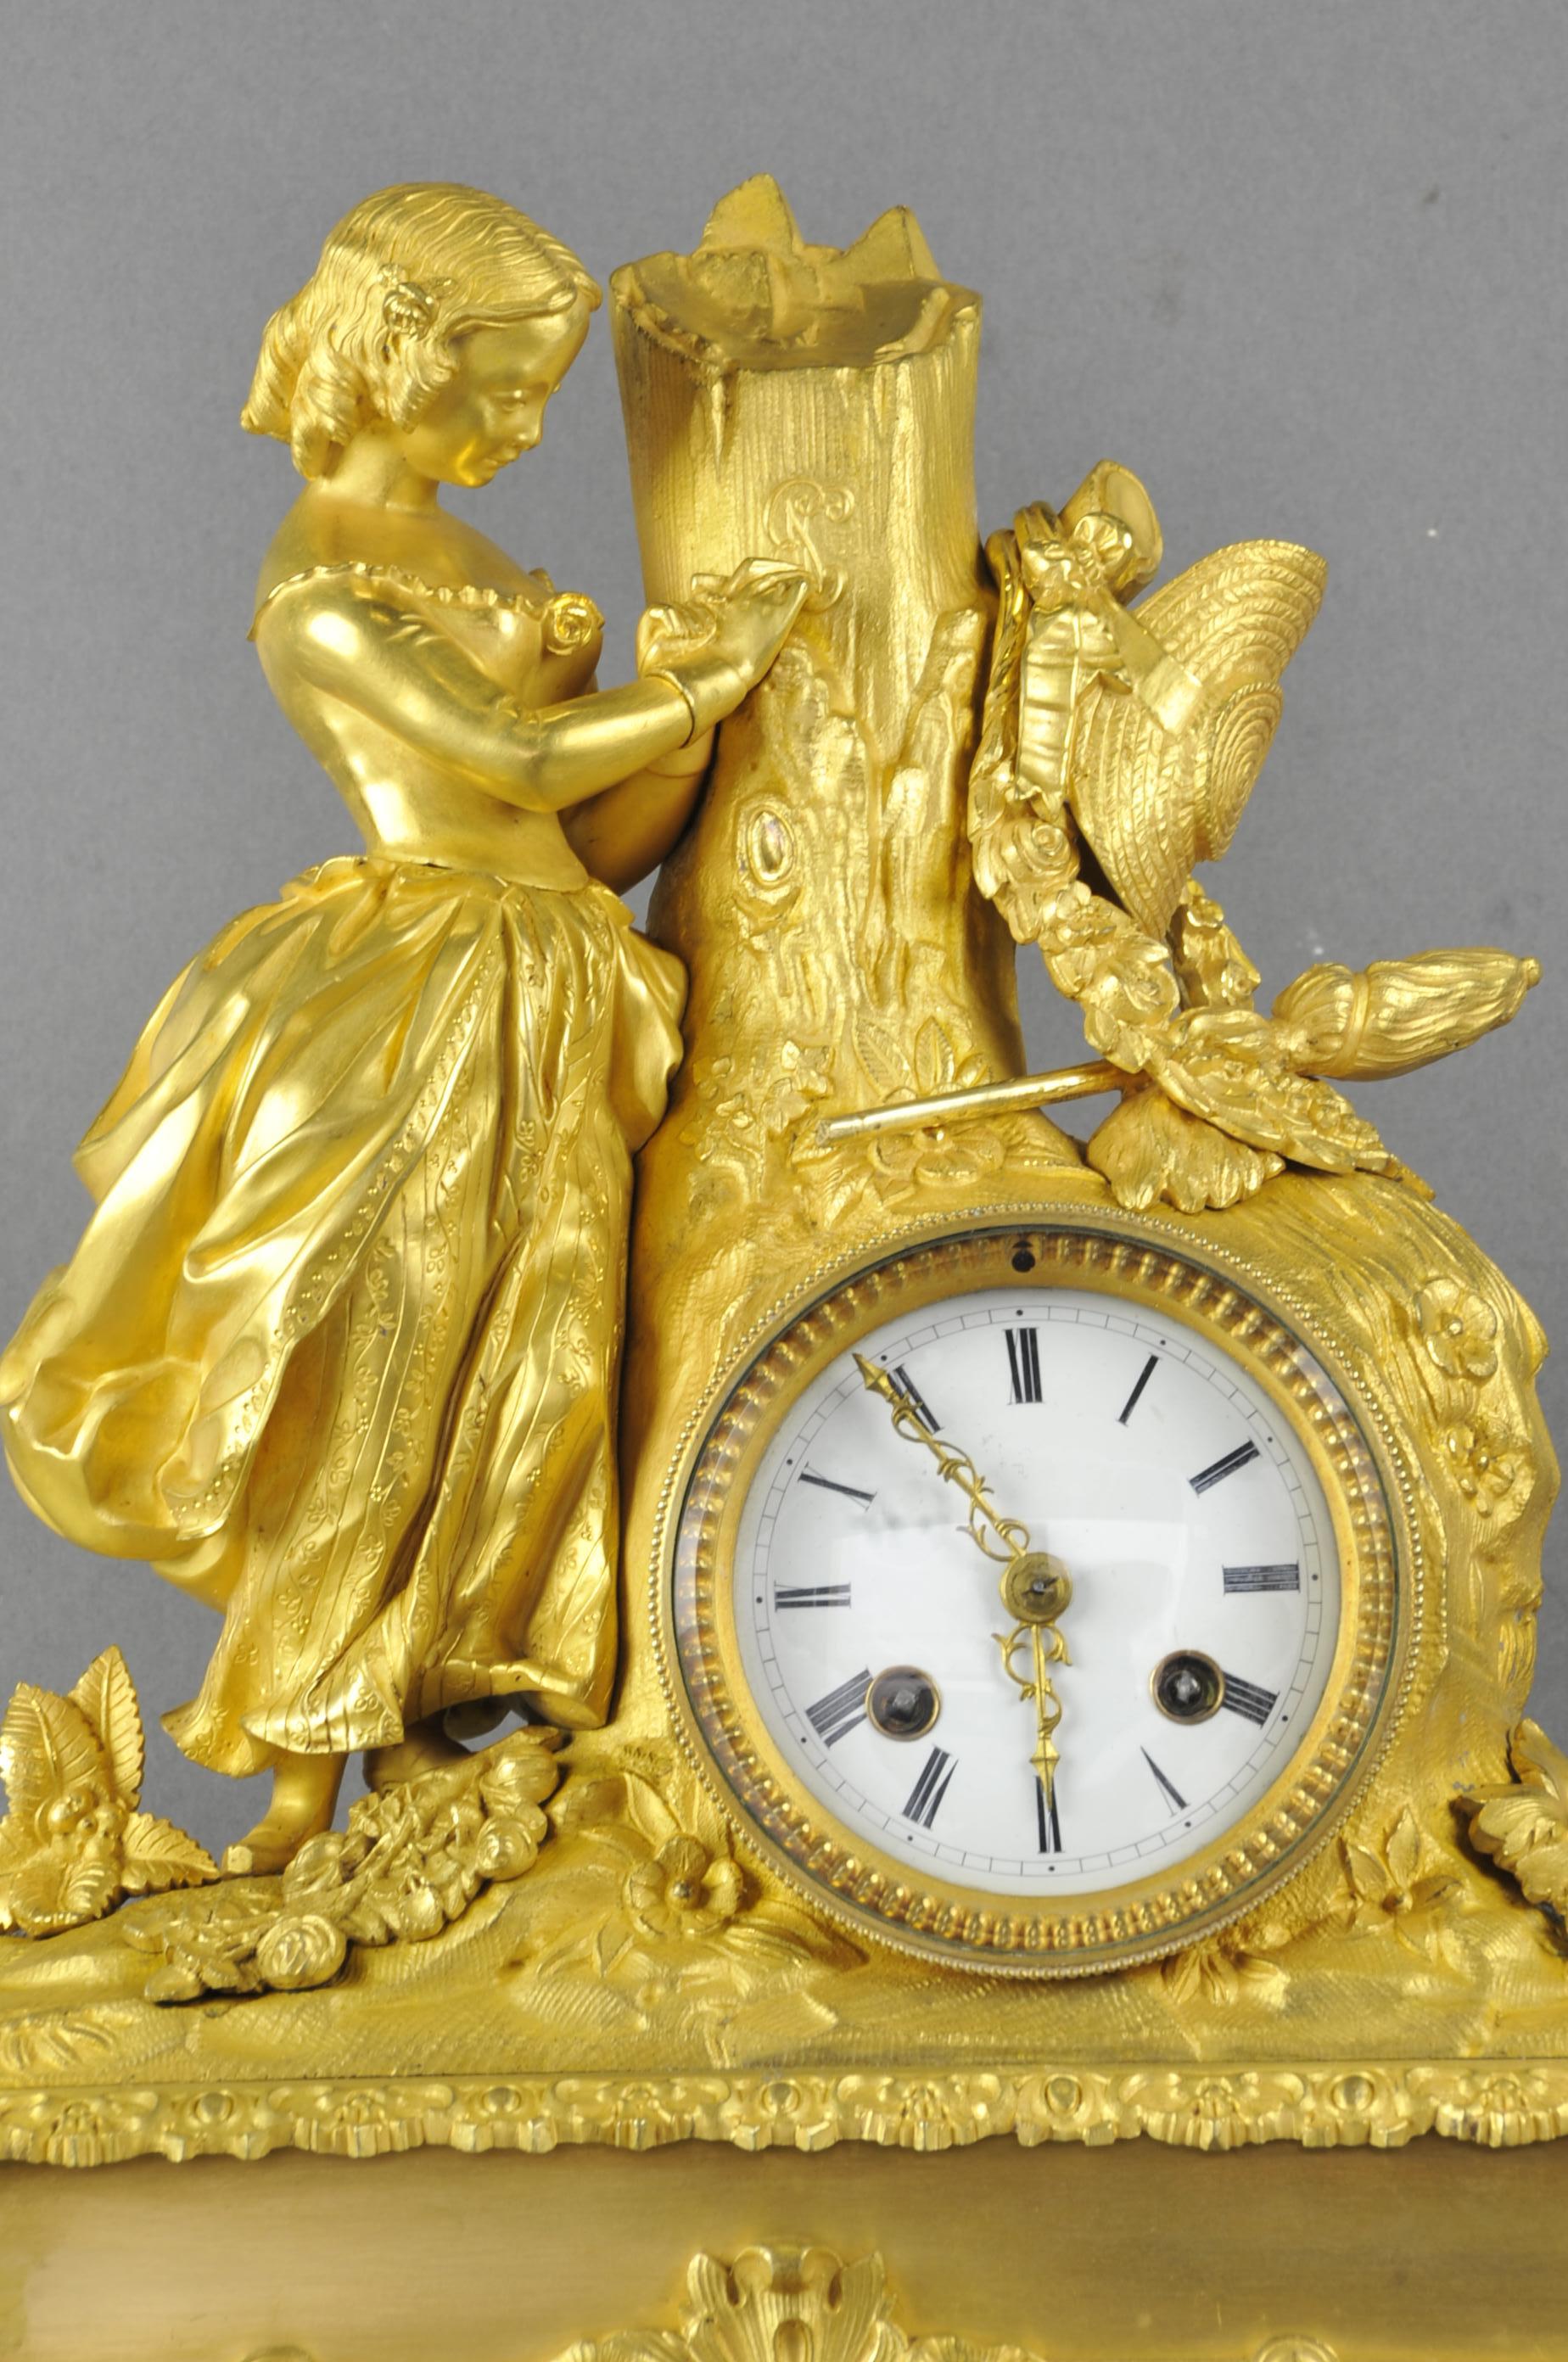 Superb clock in finely chiseled gilt bronze from the restoration period (circa 1830) presenting a scene characteristic of the romantic movement of the time.

Attention to detail and fine craftsmanship.
Enamelled dial.
Wire movement.
Superb